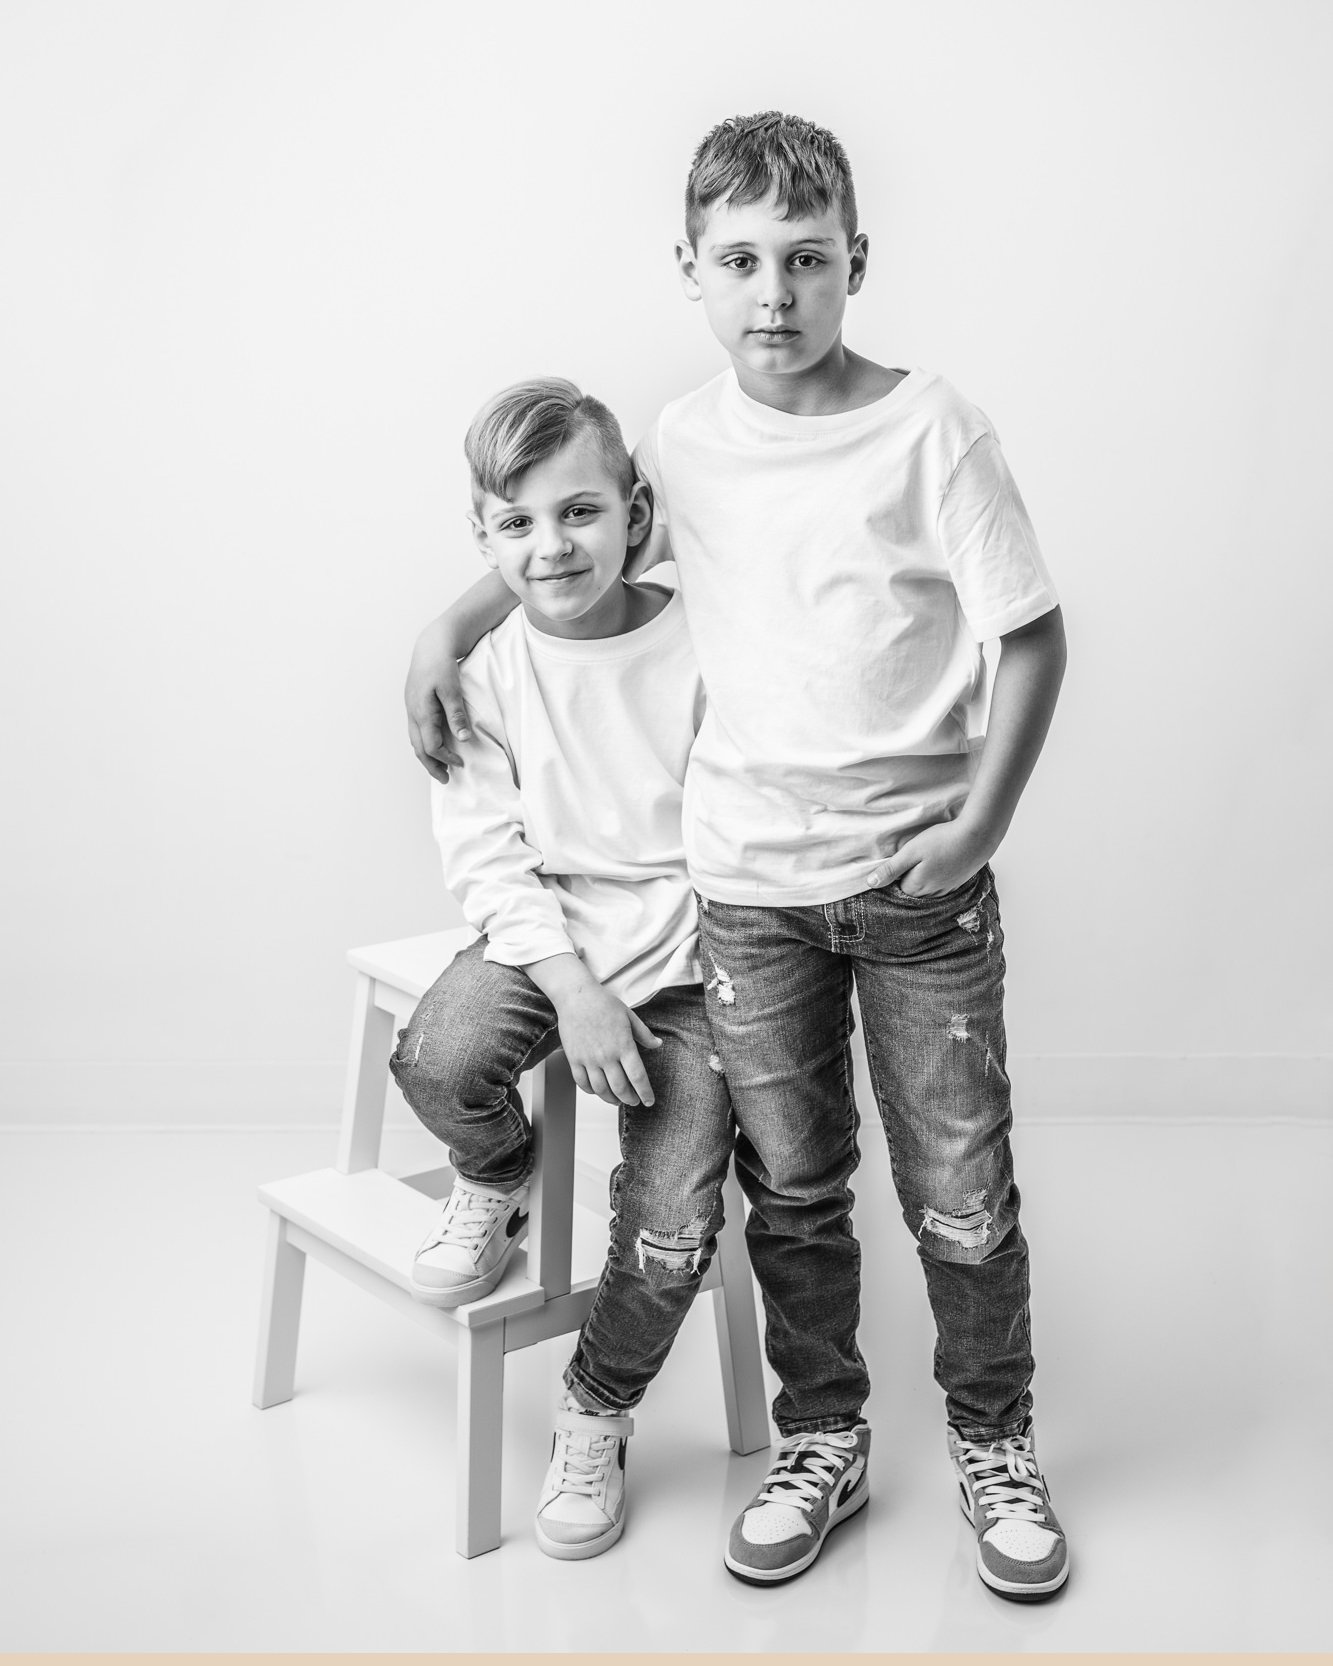 My studio is clean and minimalistic, allowing personalities, feelings, and relationships to shine. With a fresh and simple backdrop, your family stays the focus of the session. Classic.